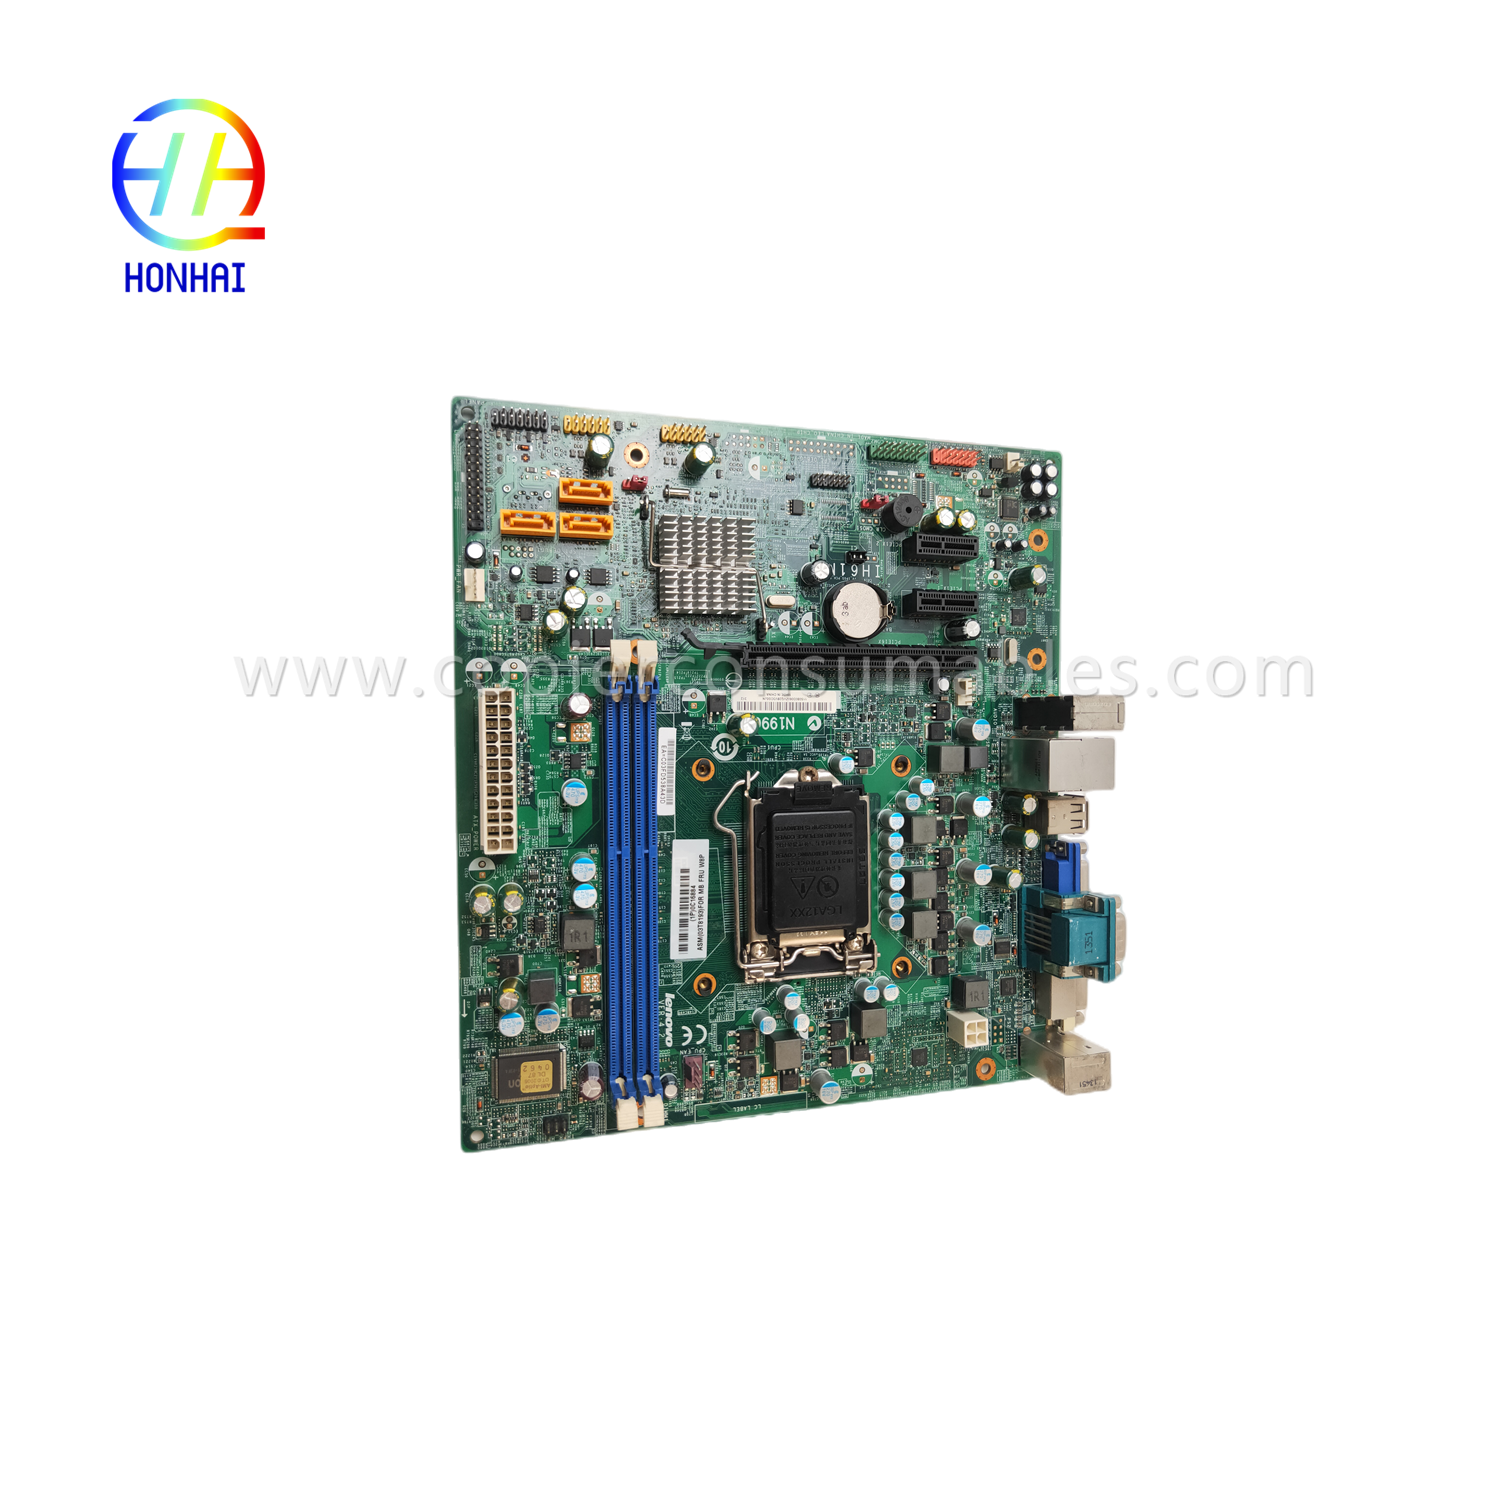 https://www.copierconsumables.com/otherboard-for-lenovo-thinkcentre-m72e-lga-1155-03t8193-system-board-product/